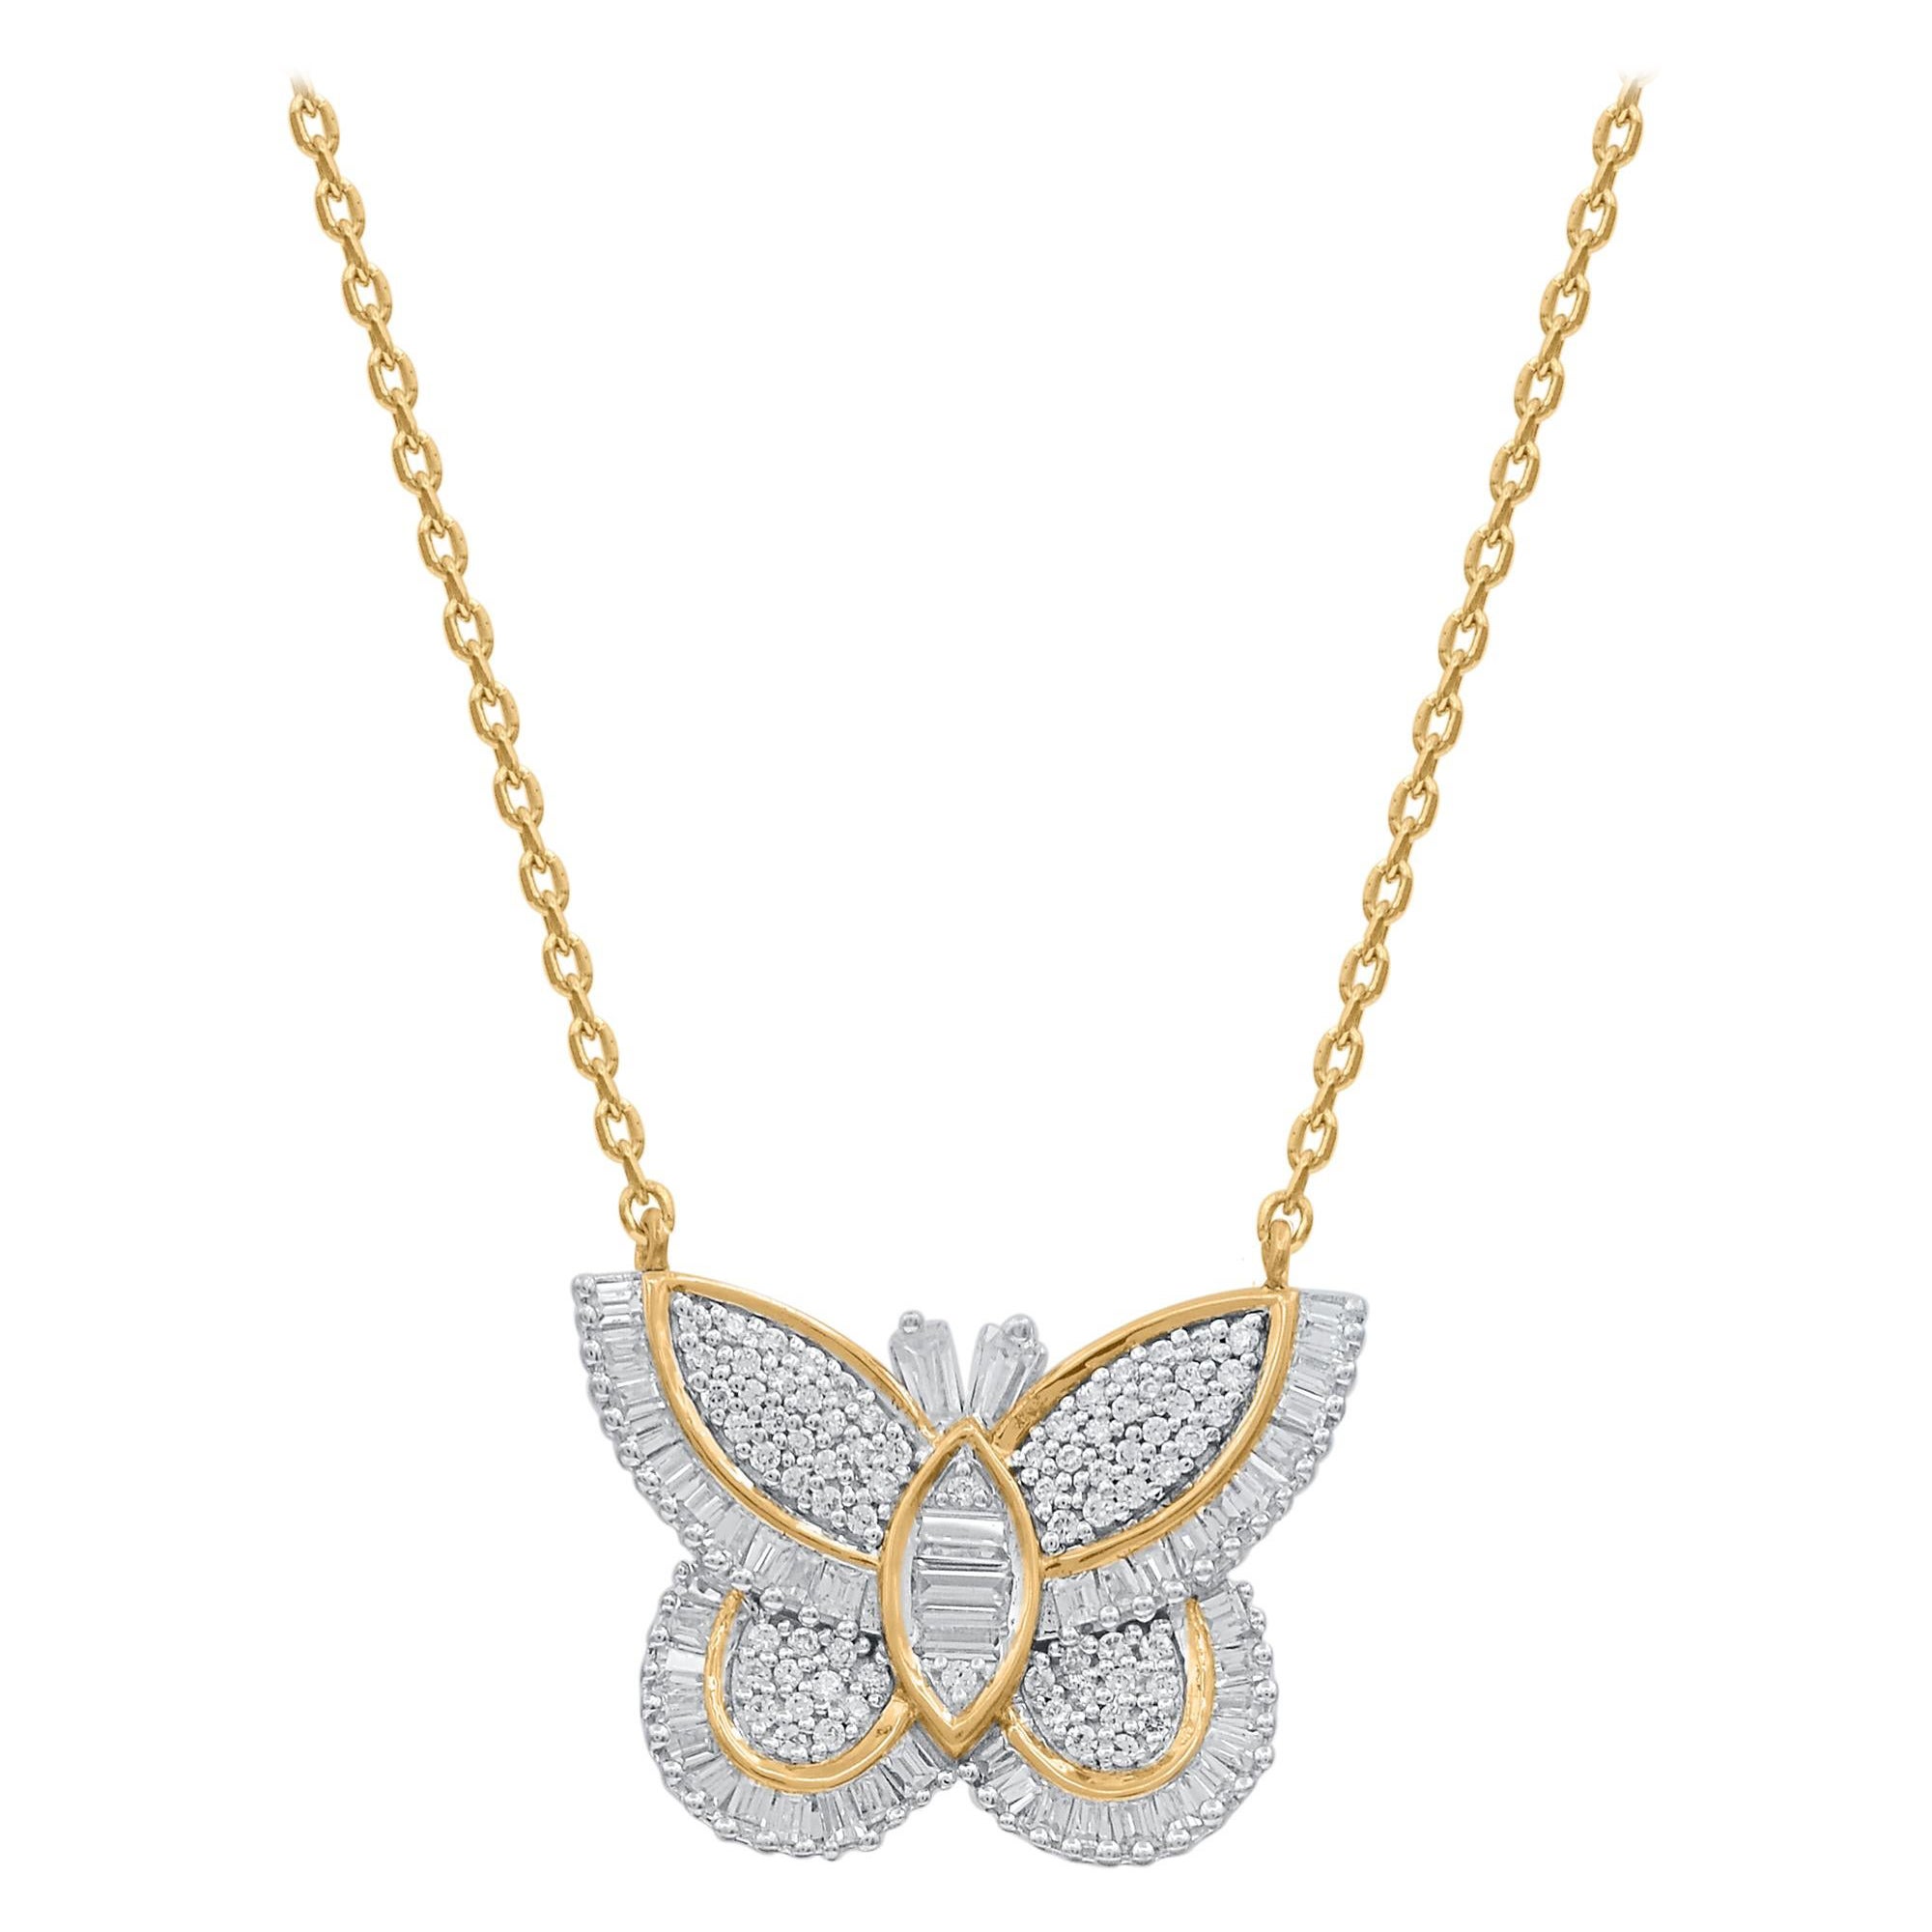 TJD 0.60 Carat Baguette Diamond Butterfly Pendant Necklace in 14KT Yellow Gold